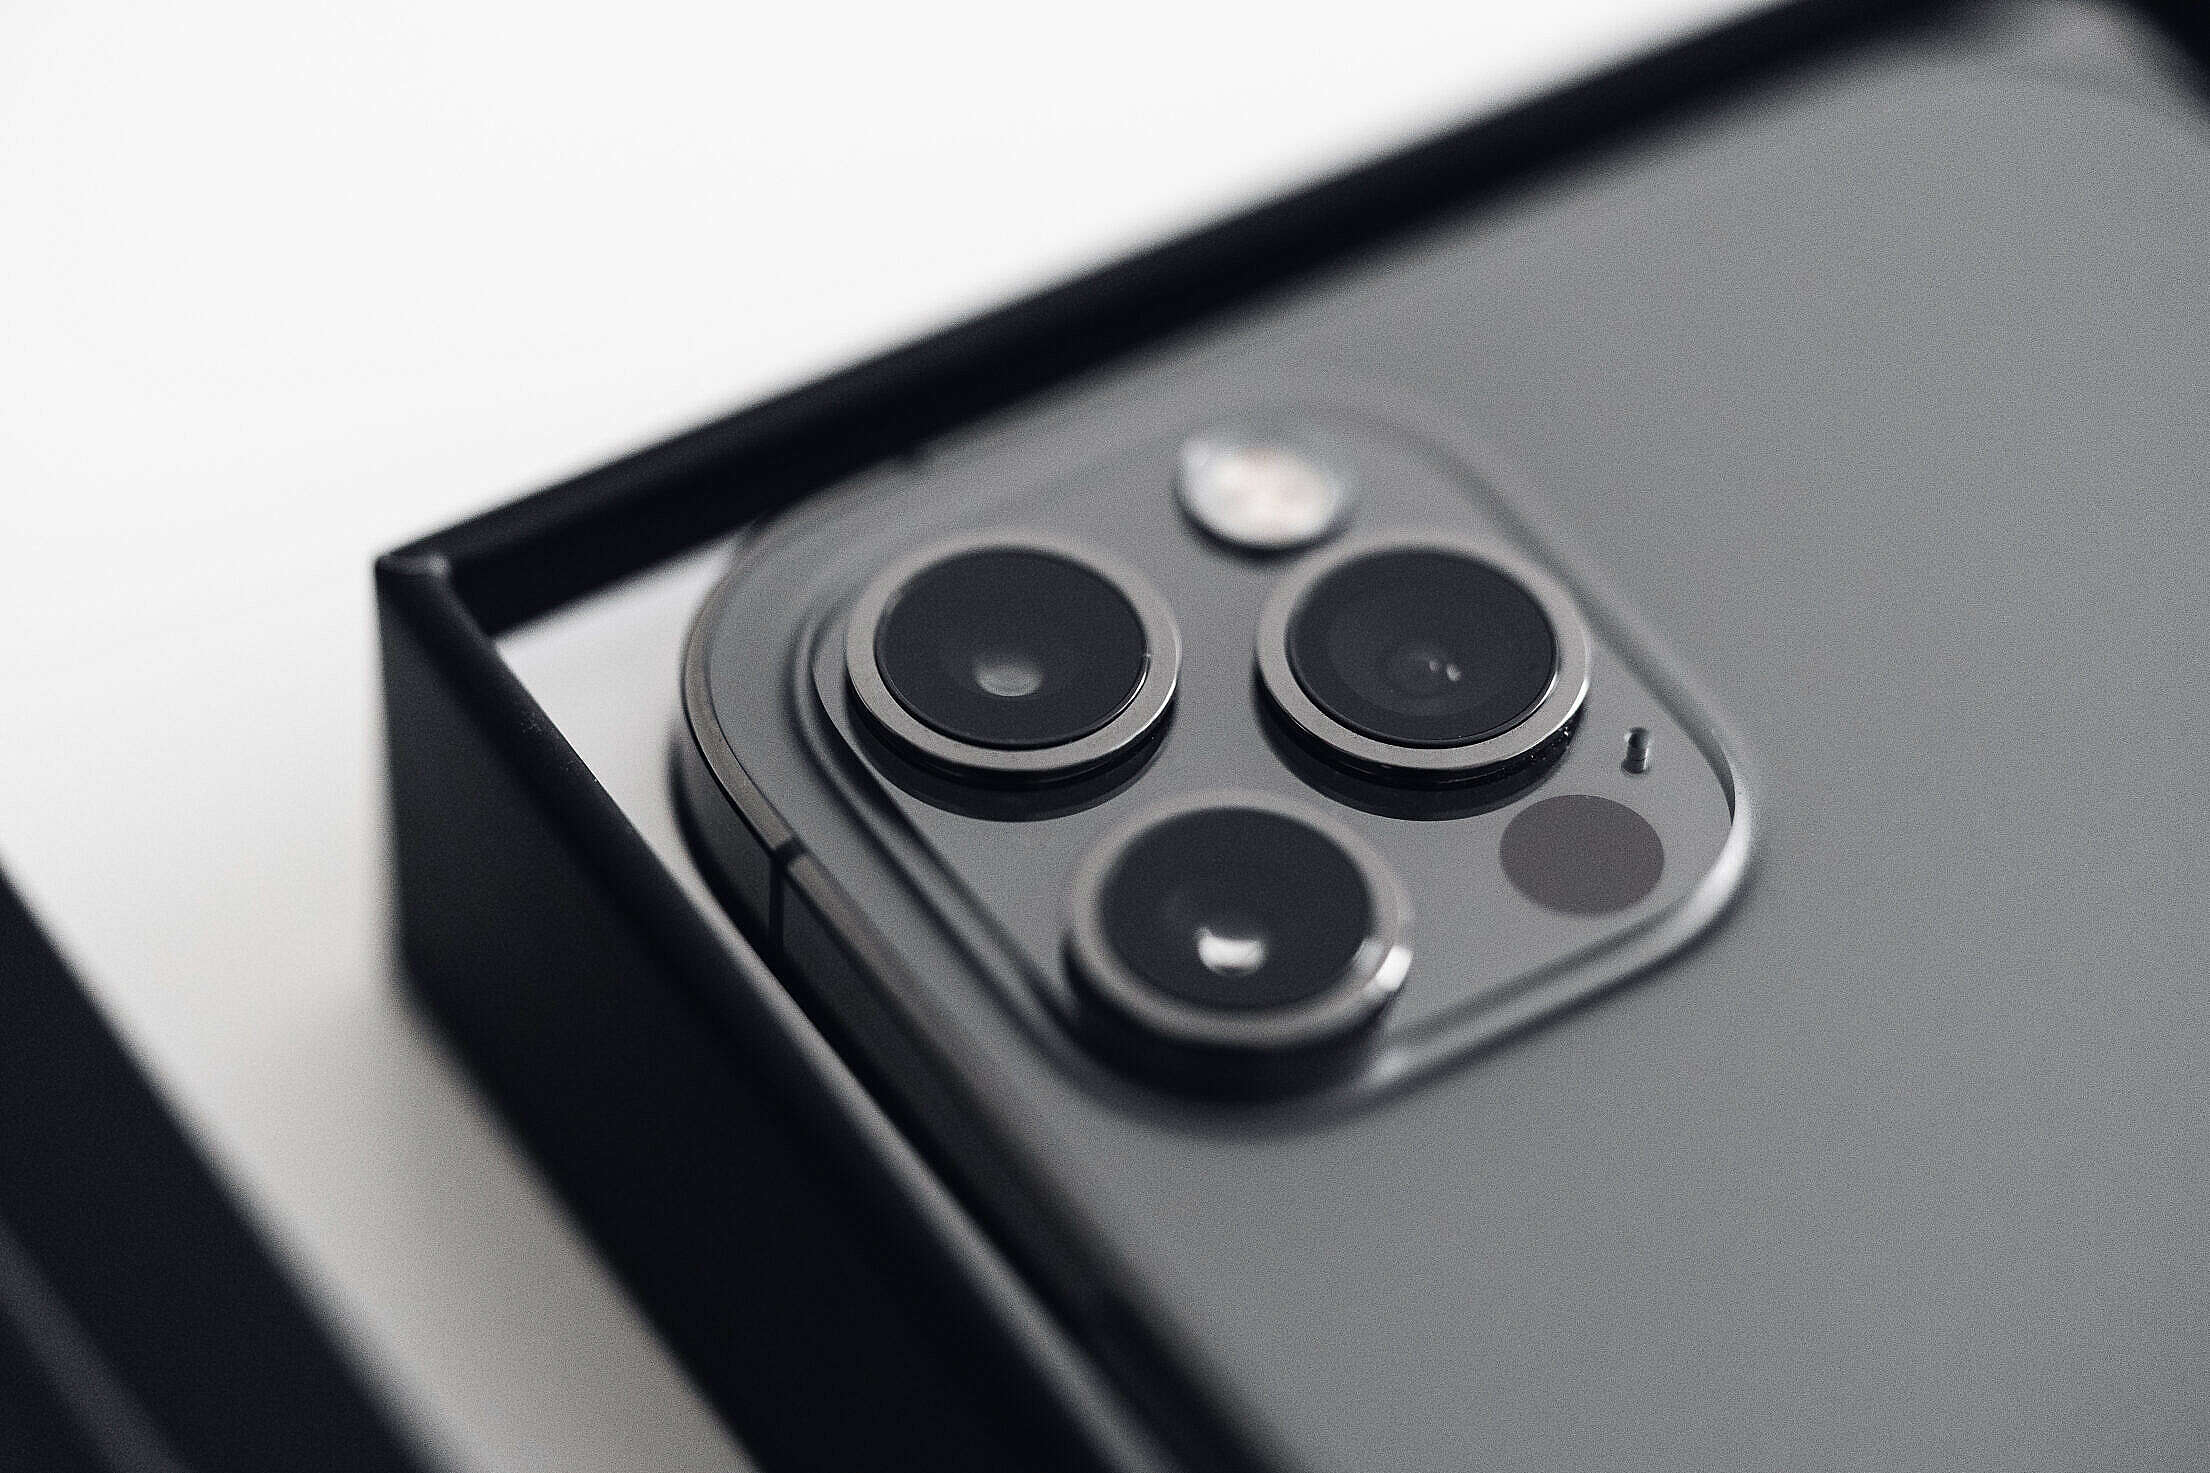 Detail of iPhone 12 Pro Cameras Free Stock Photo